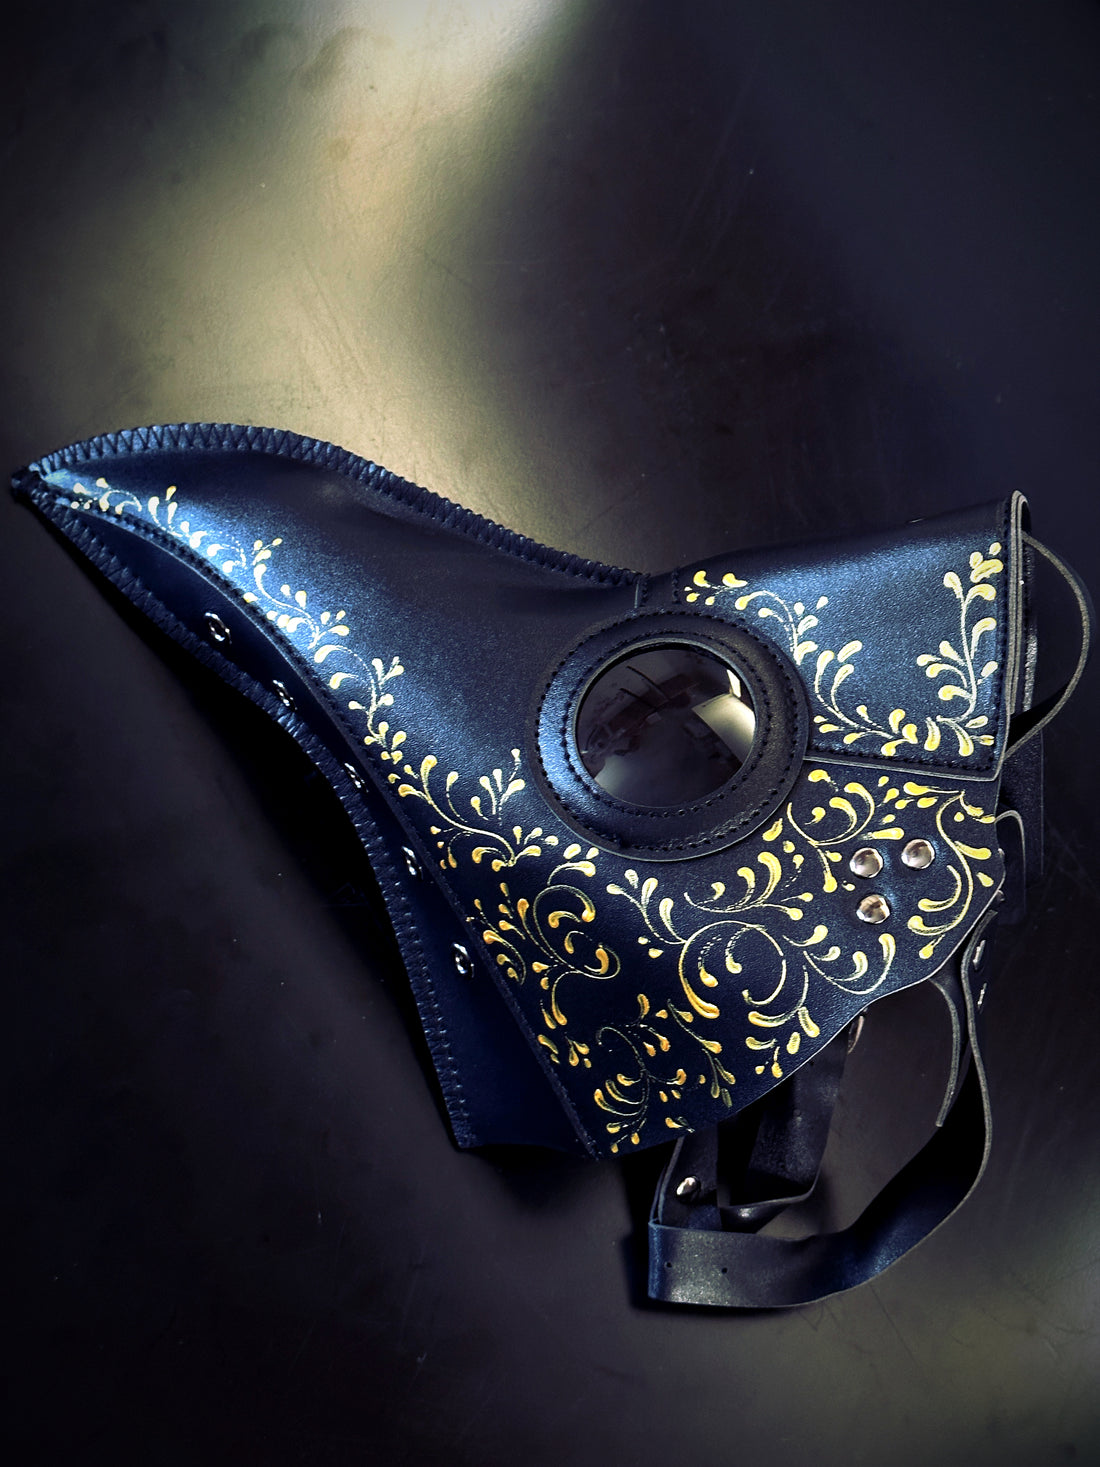 Black plague mask with yellow gold filigree for sale.